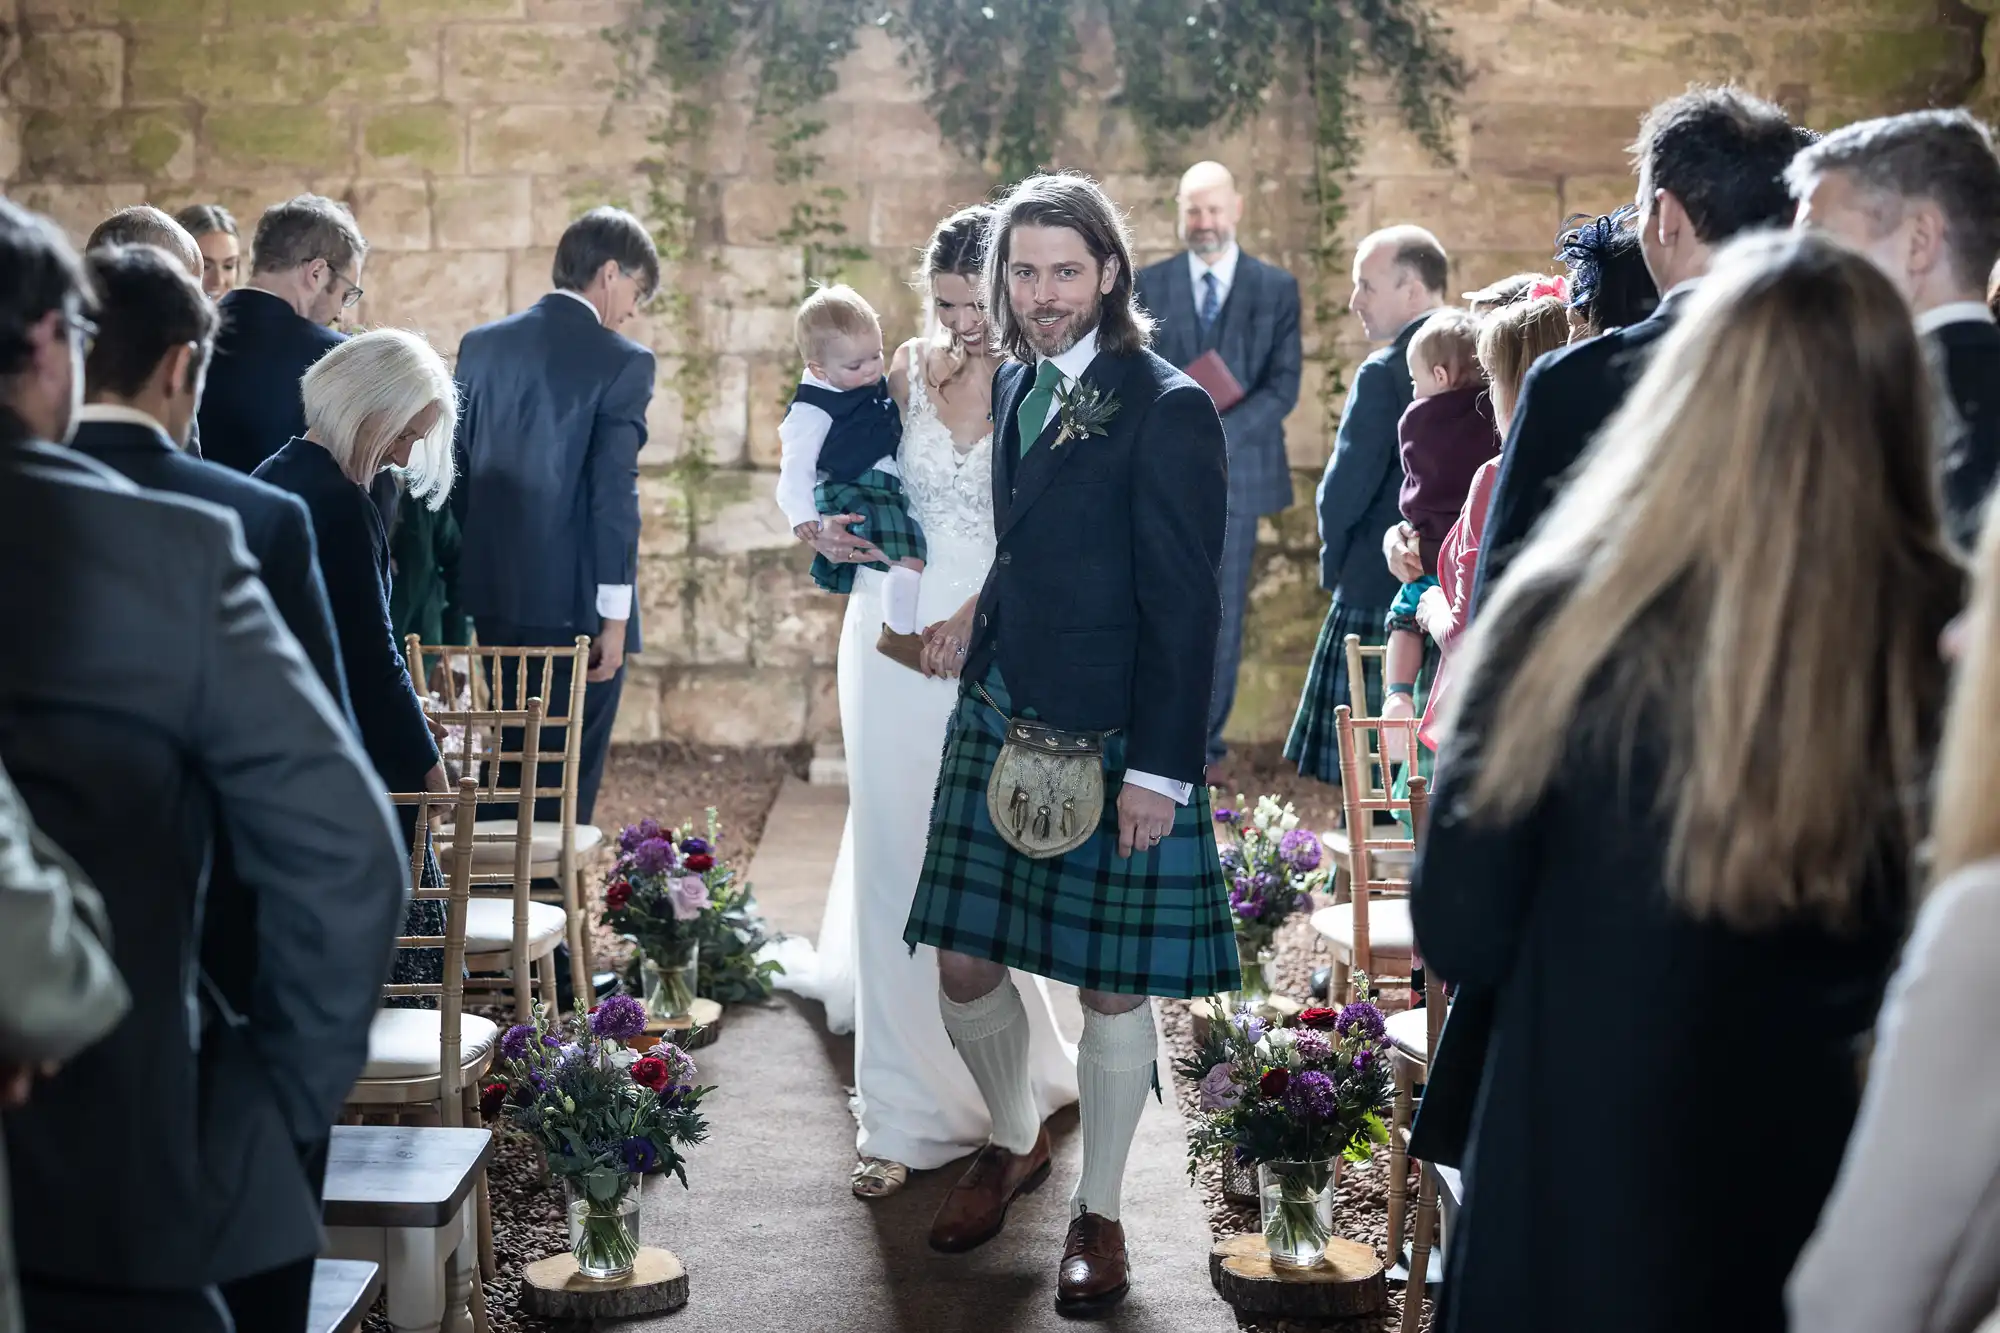 A couple walks down the aisle in a wedding ceremony. The groom wears a kilt, while the bride holds a child. Guests line the aisle, and a stone wall with foliage is in the background.